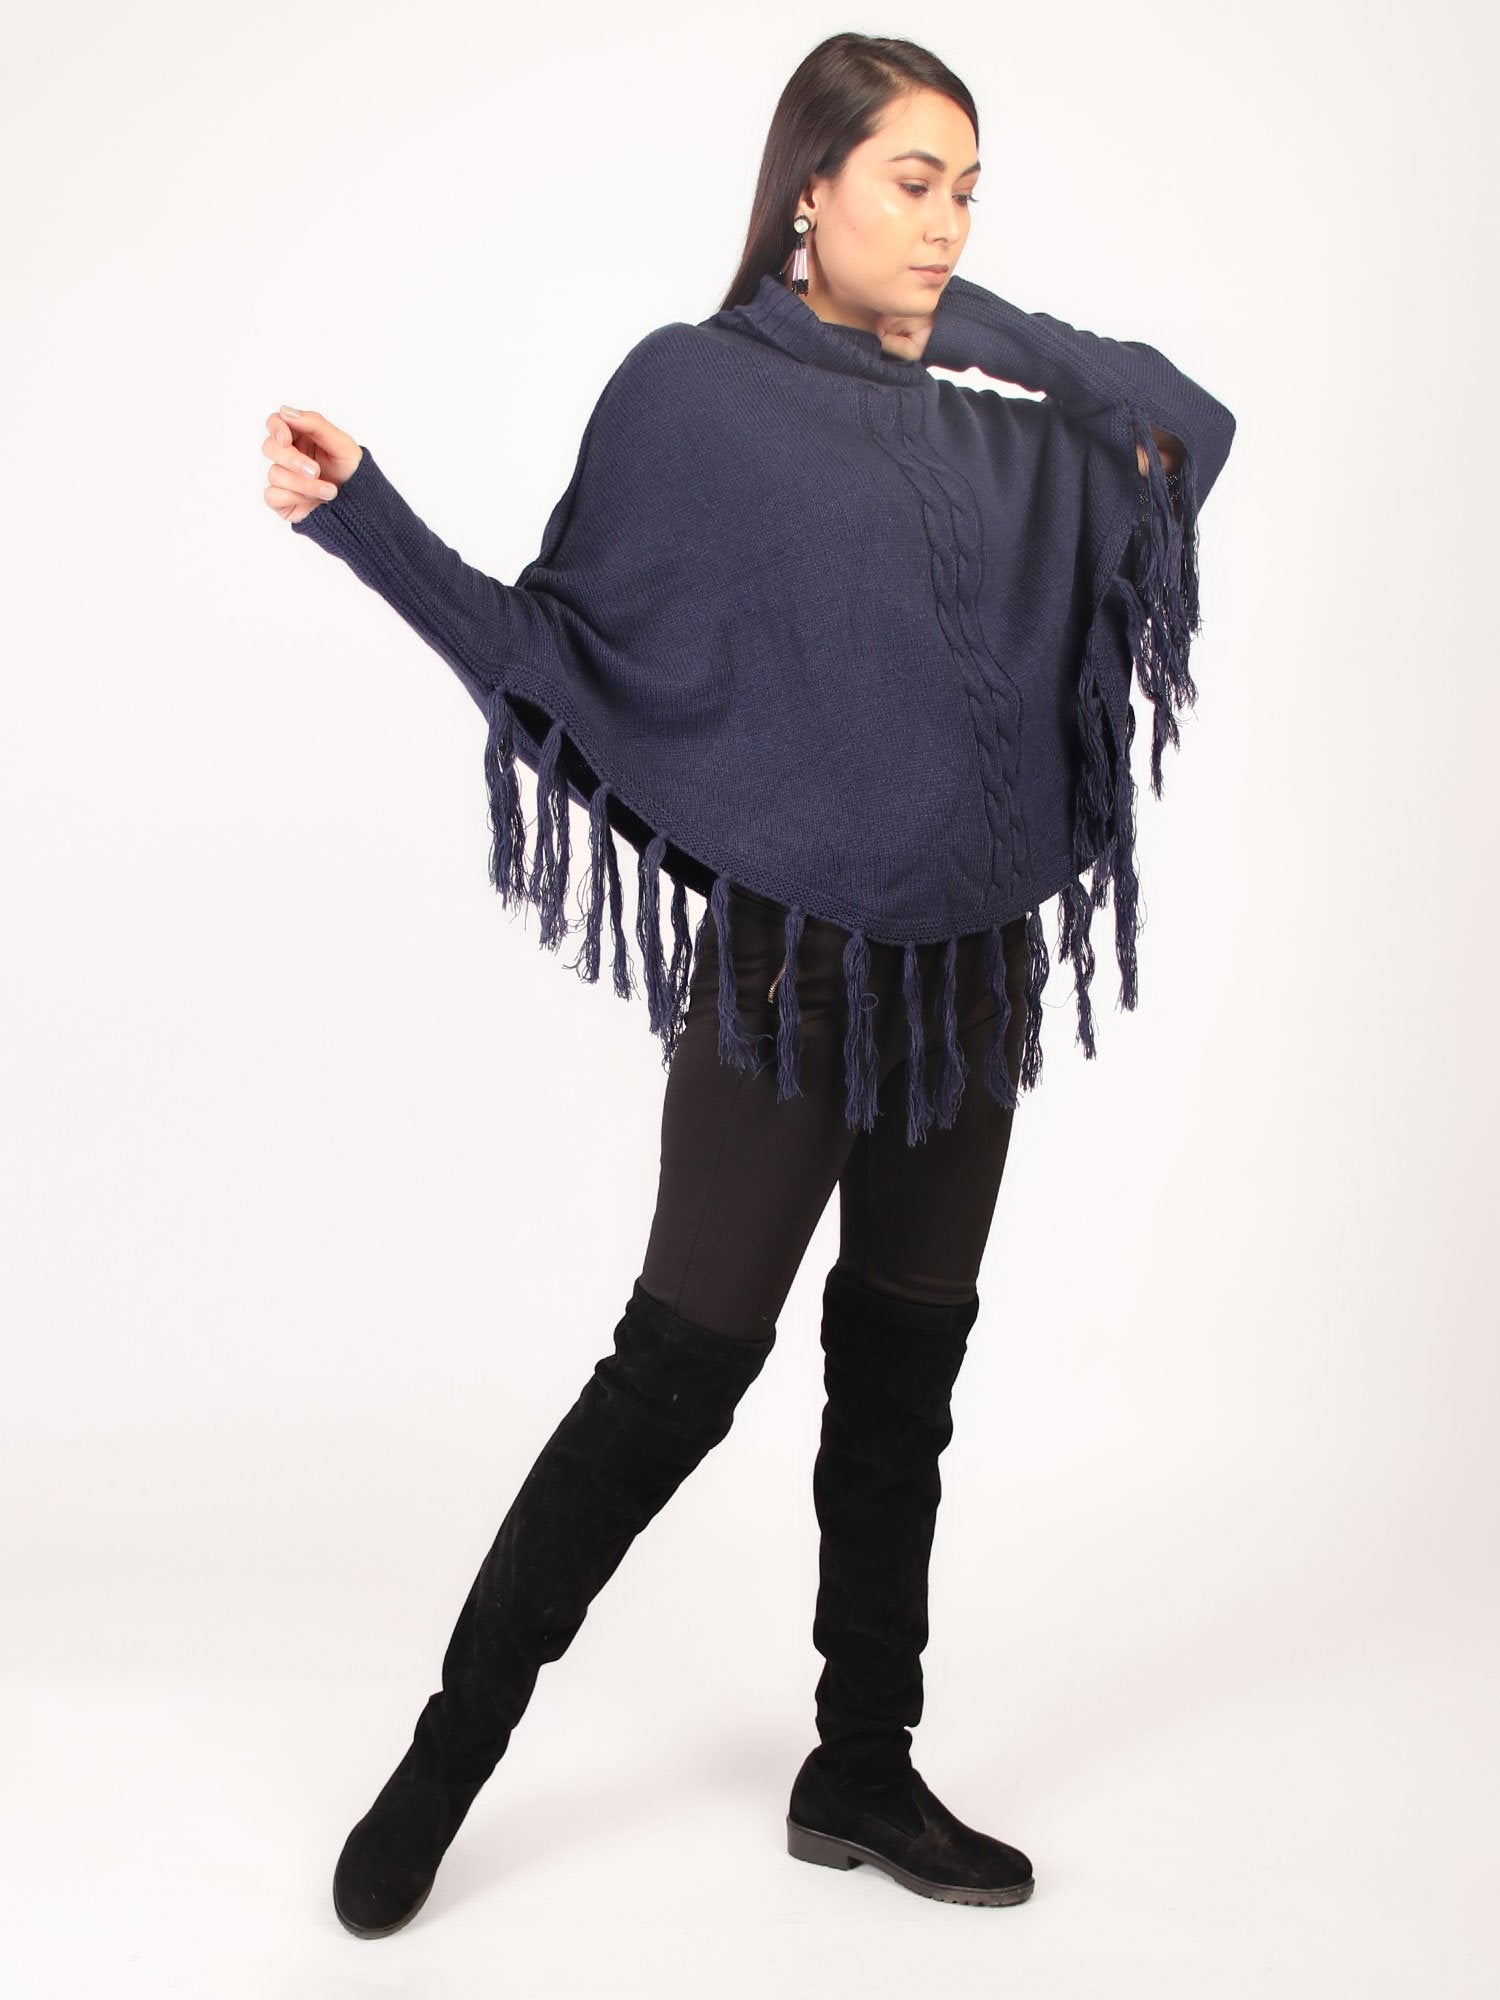 Poncho With Tasssles Navy Blue